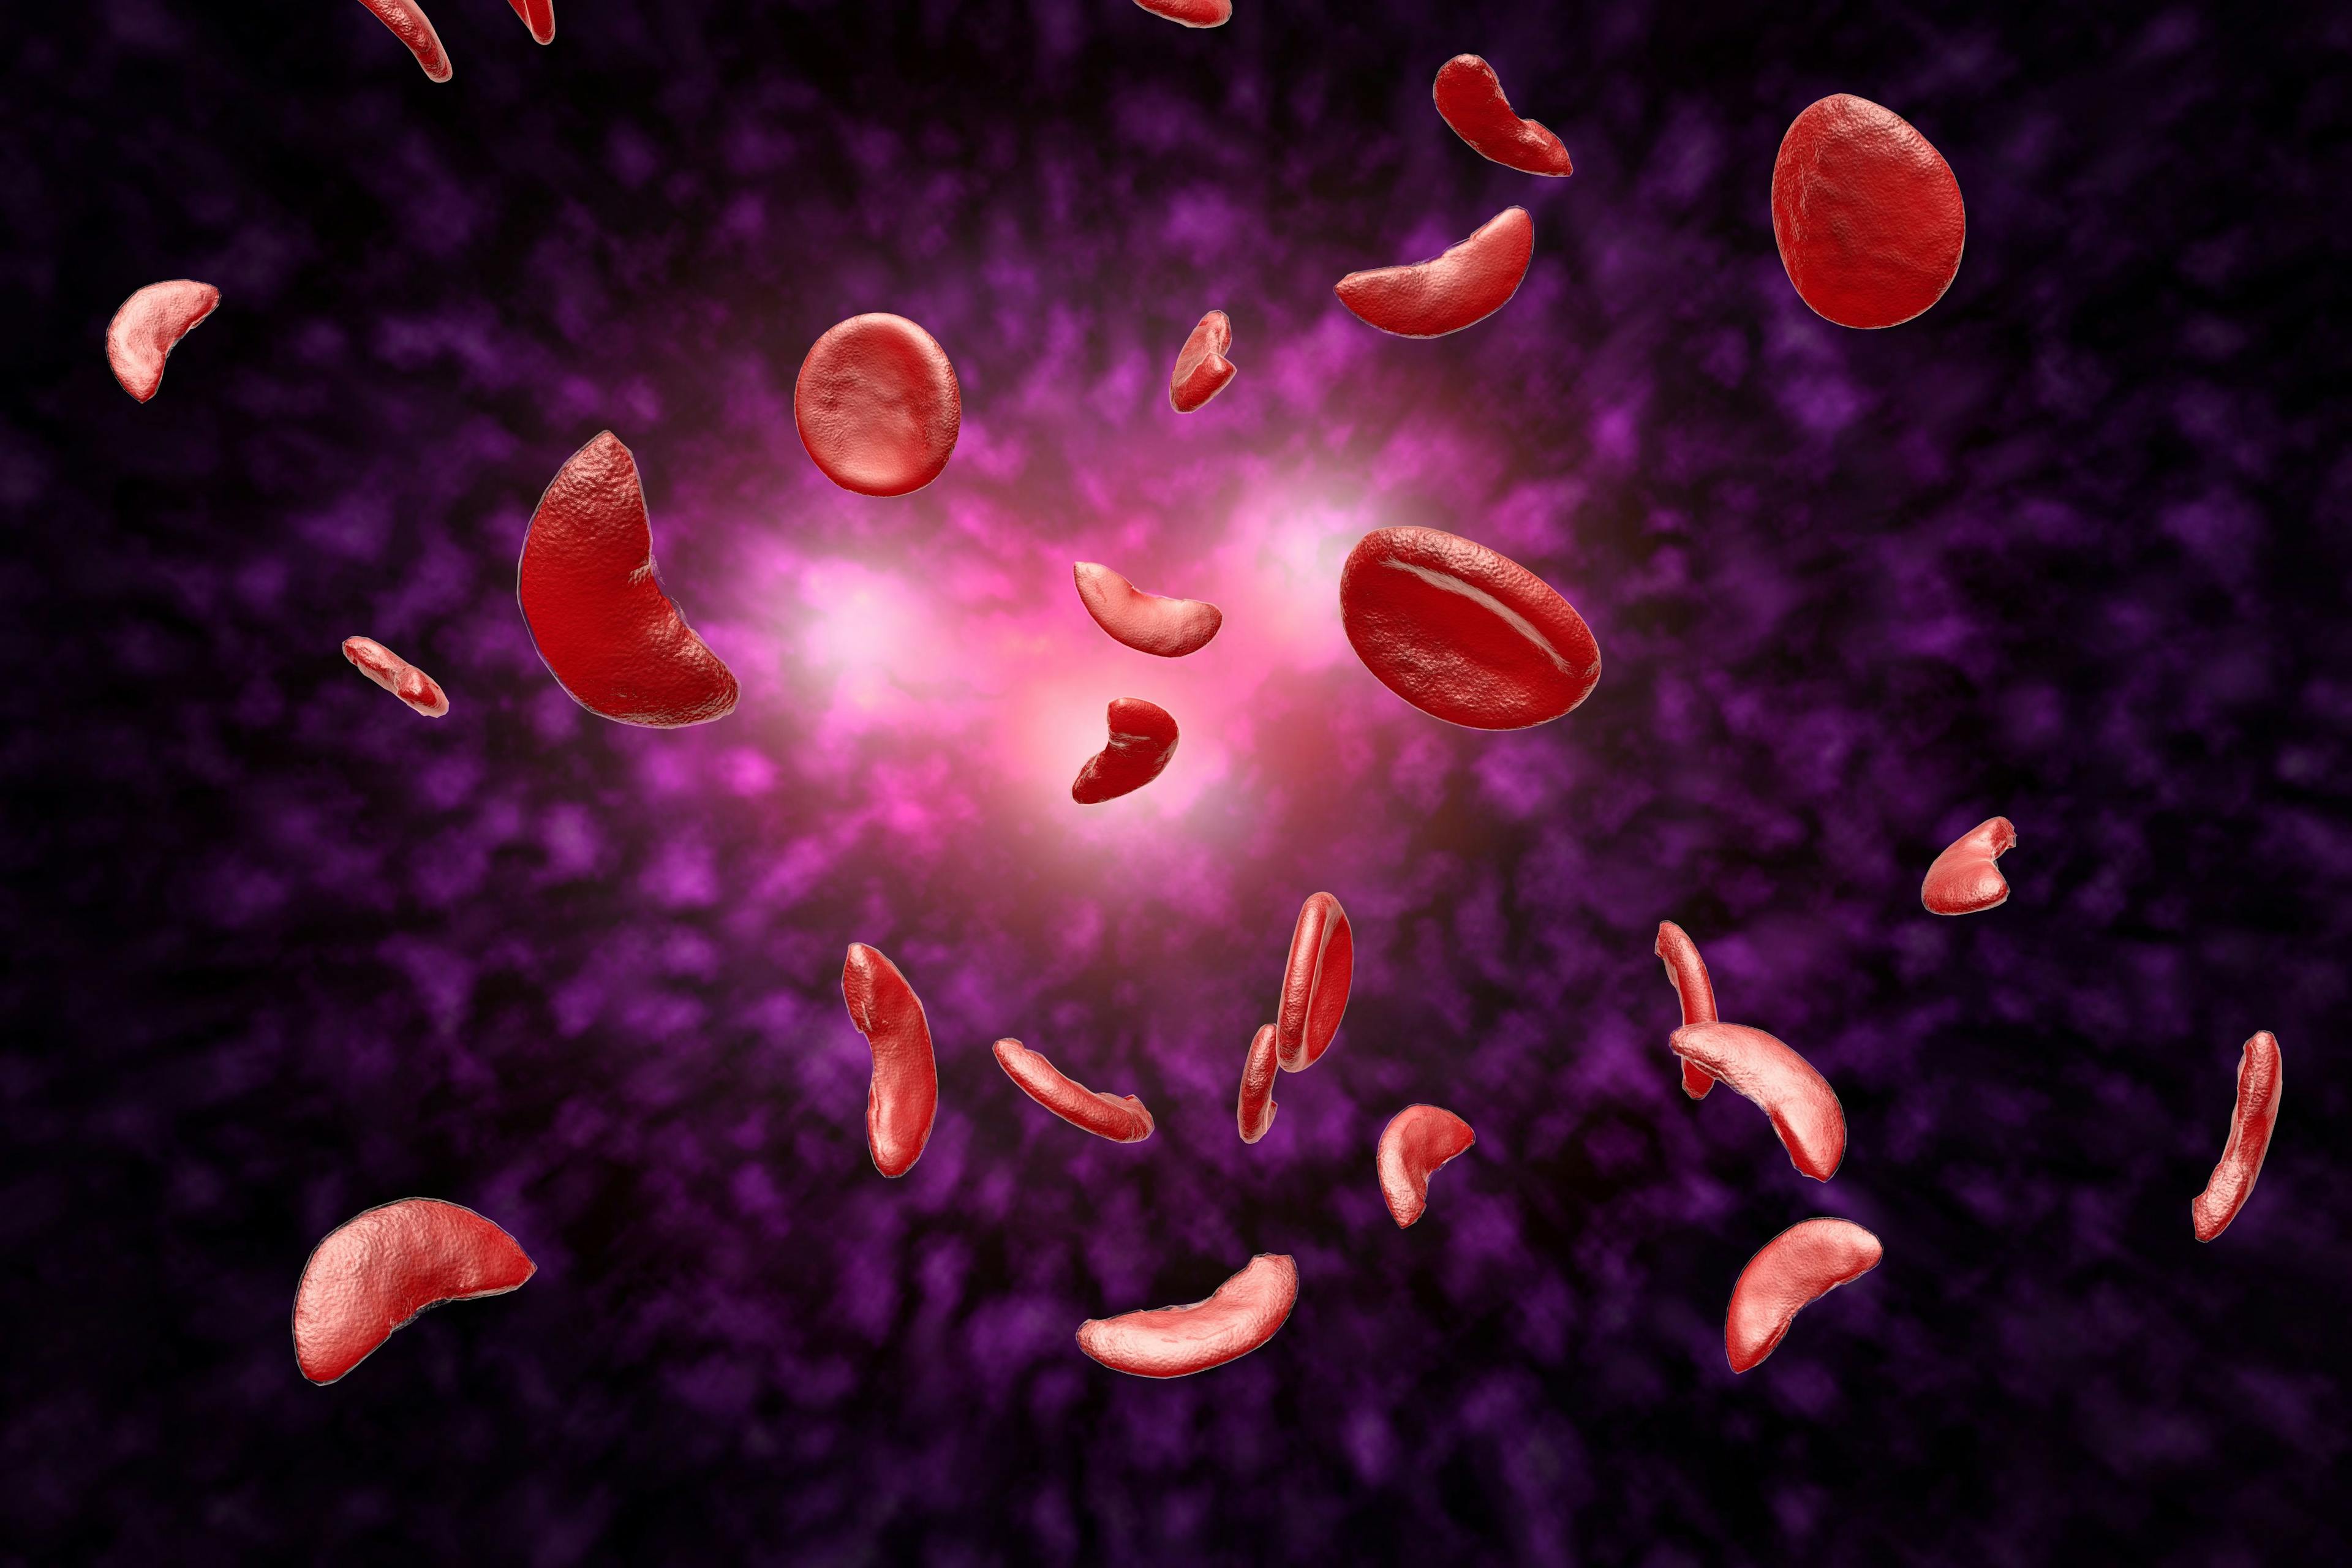 ICER Reports Sickle Cell Gene Therapy Cost Effective at $1.9 Million